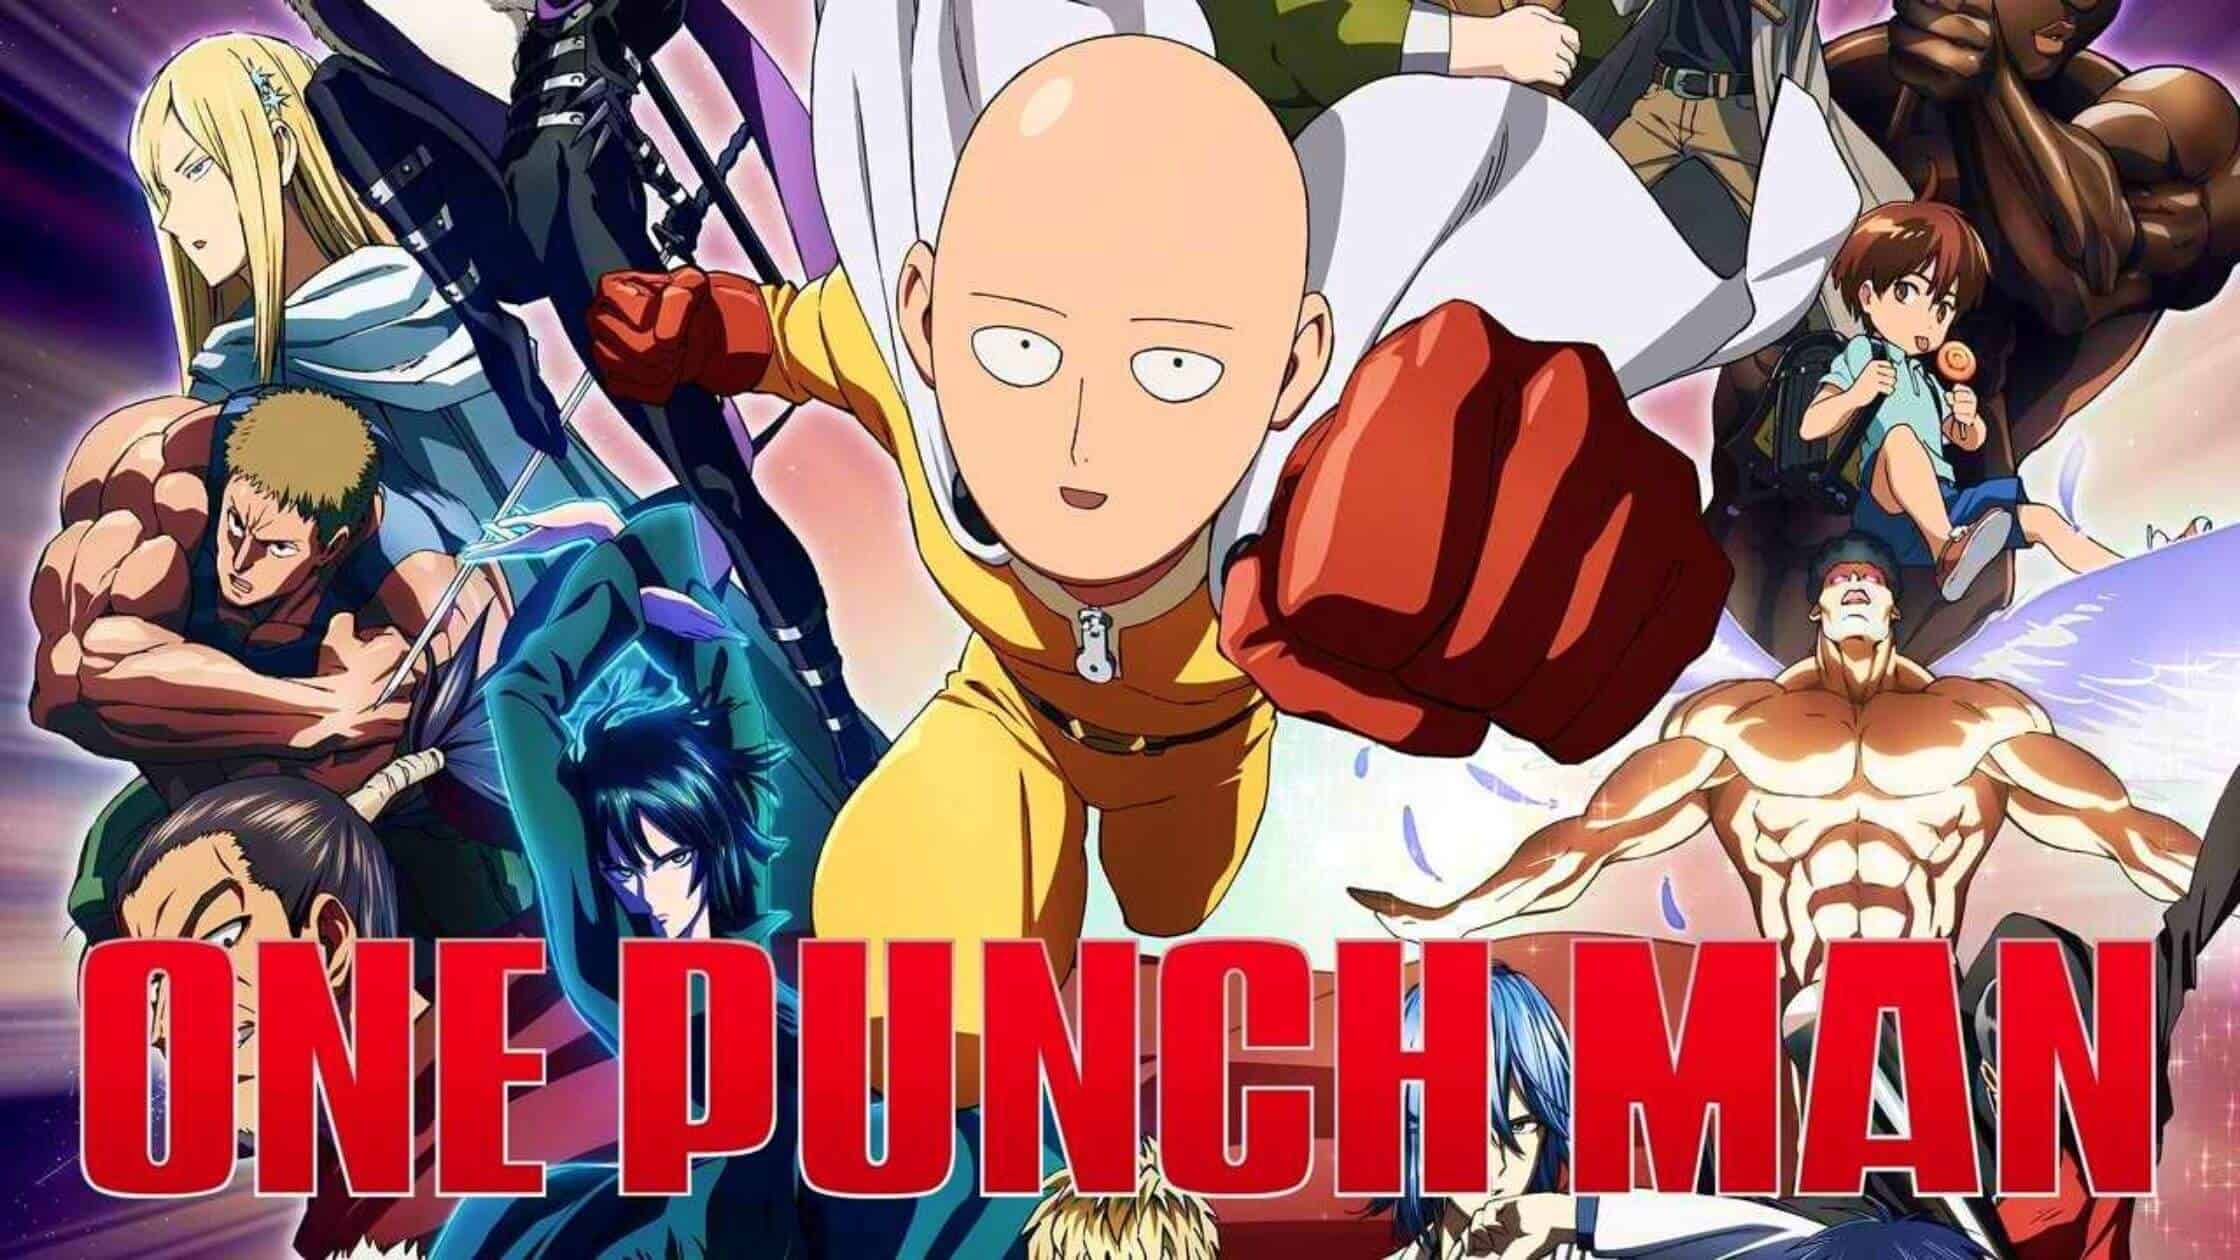 A Double Release Of One Punch Man Volumes 25 And 26 This Season